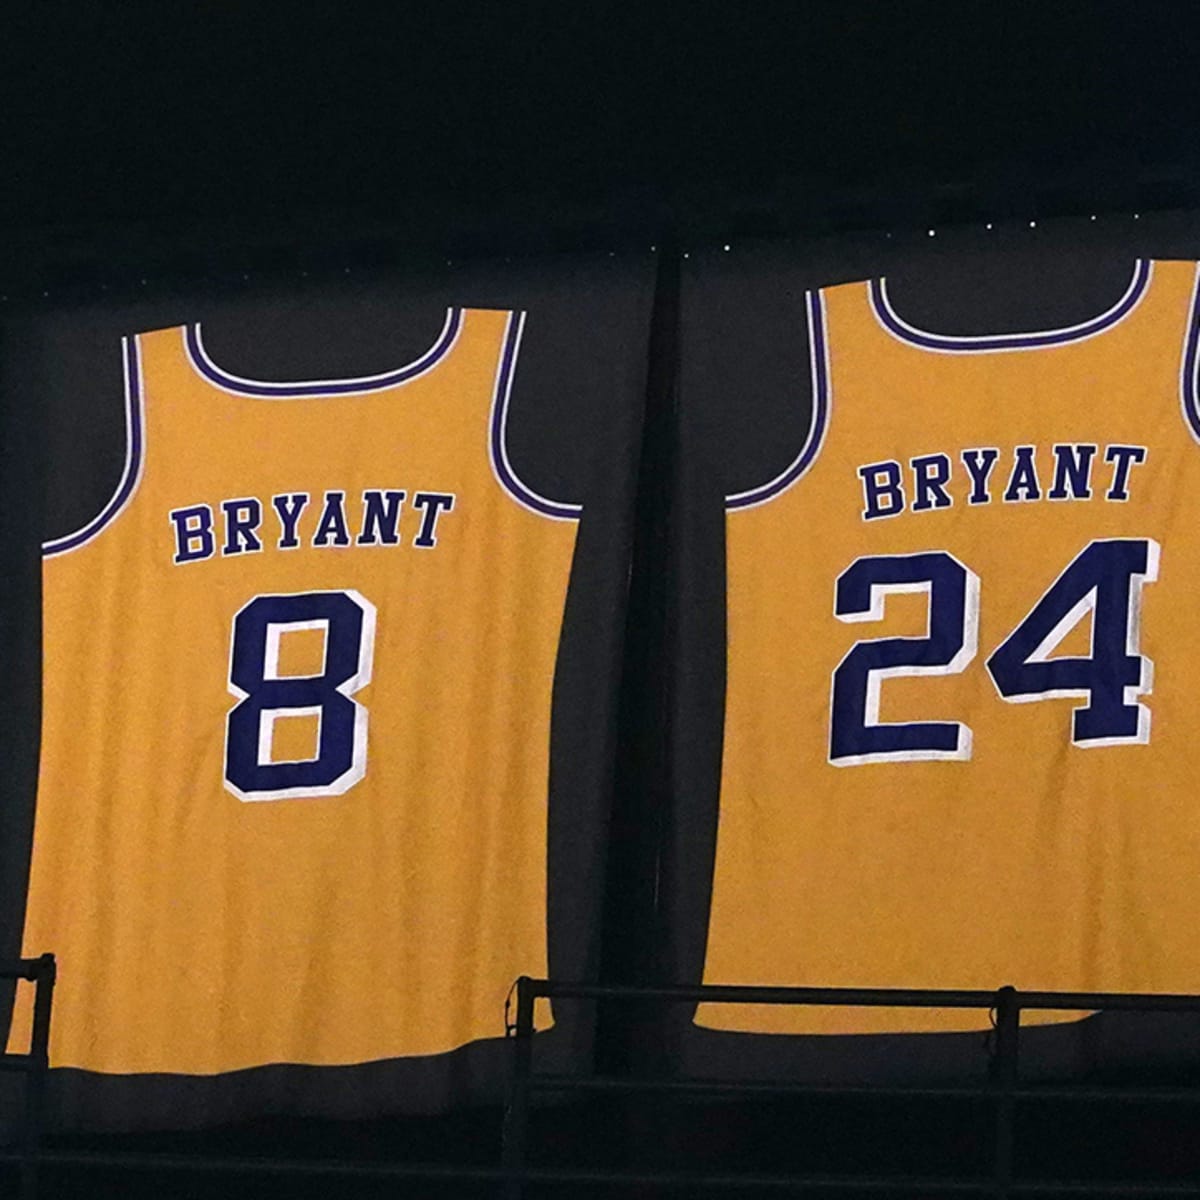 Kobe Bryant's $3.69M Rookie Jersey Is Now the Most Expensive Ever Sold –  Robb Report